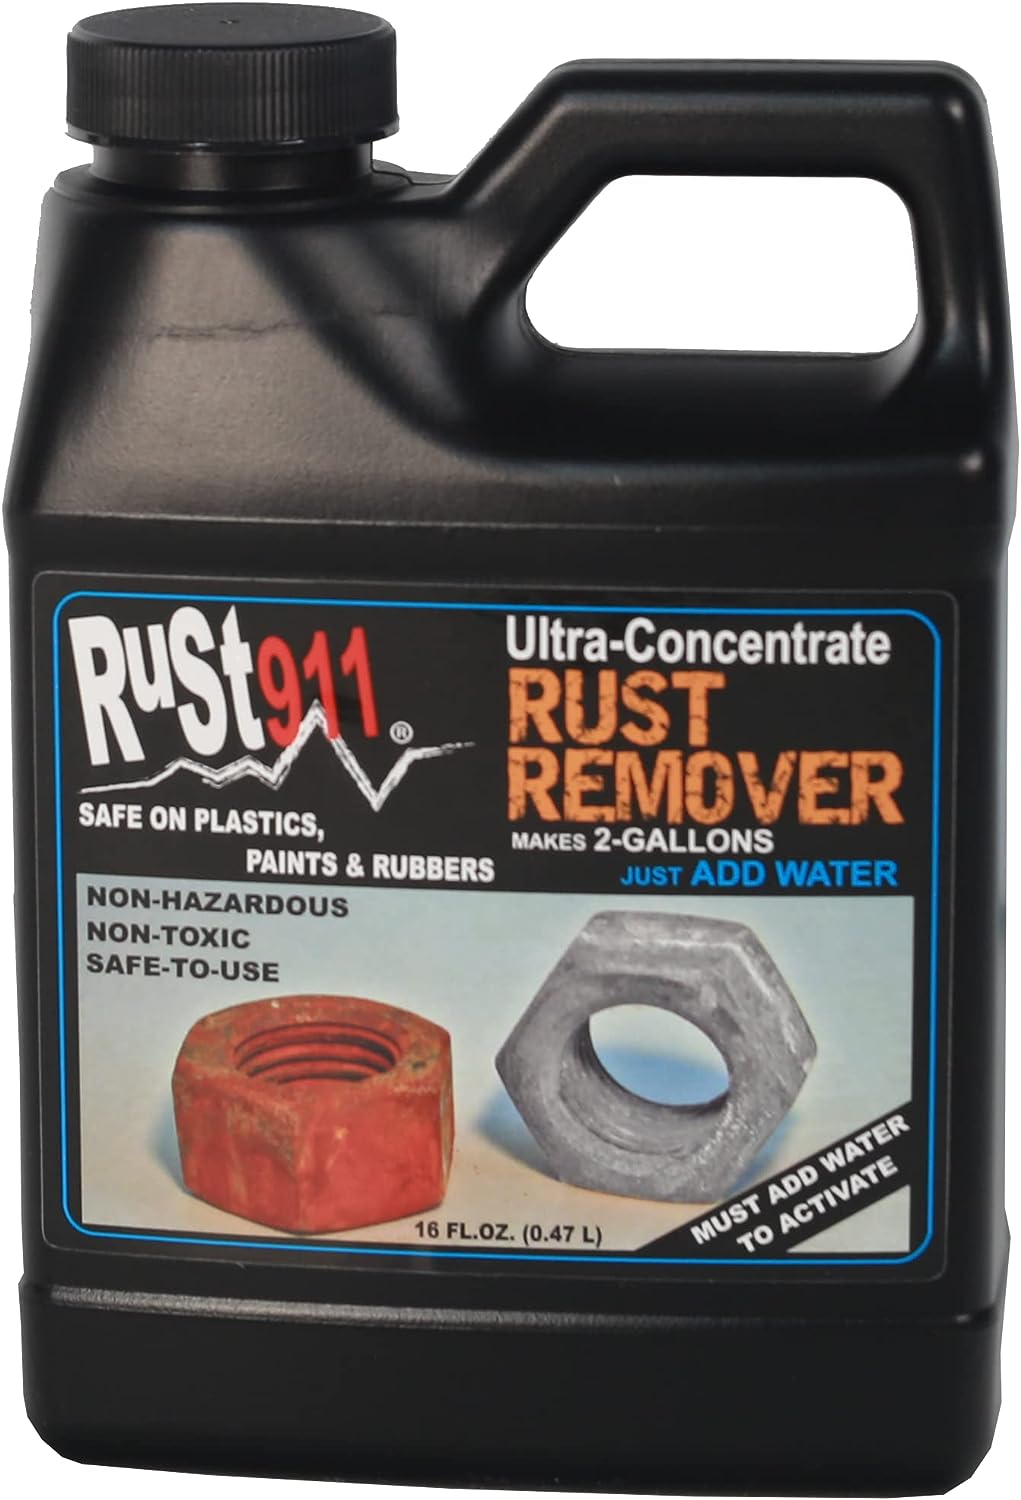 Rust911: Makes 2-Gallons of Rust Remover Dissolver - [...]